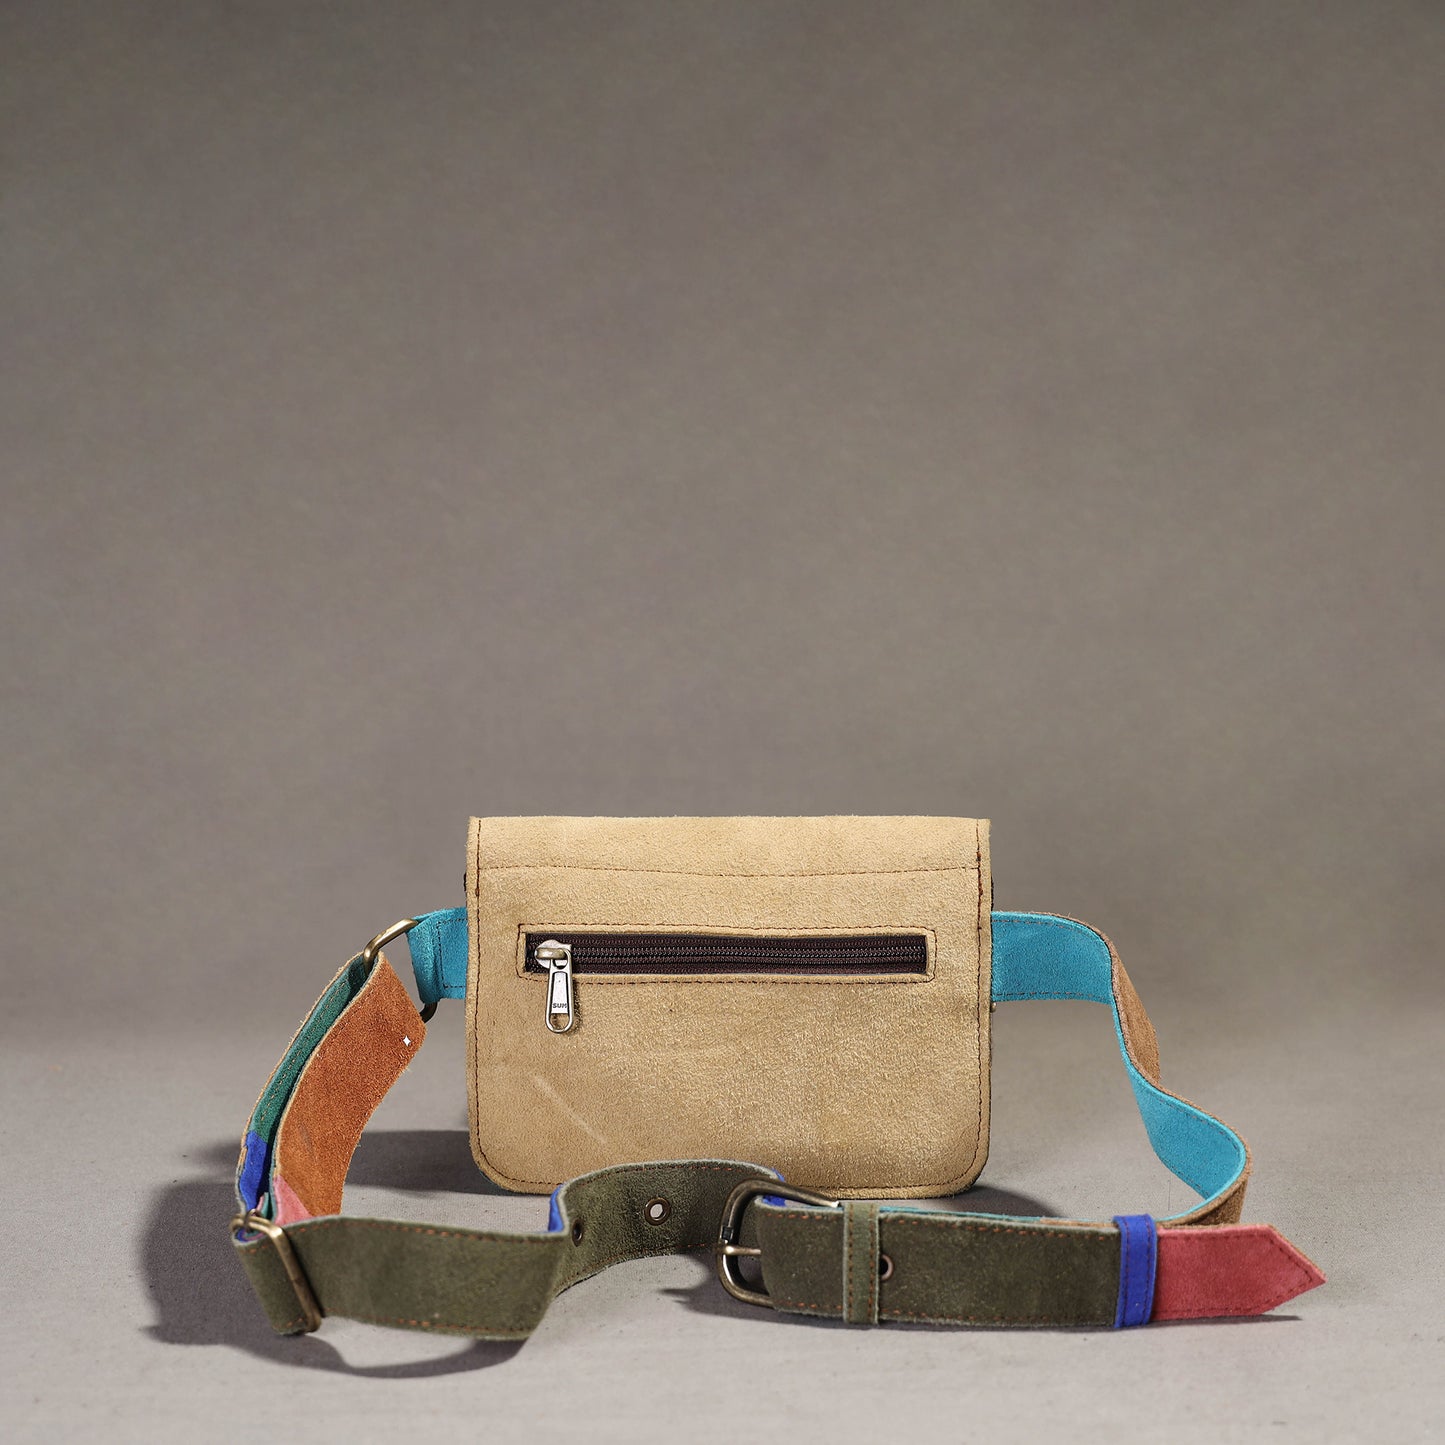 Handcrafted Suede Leather Fanny Pack / Waist Belt Bag